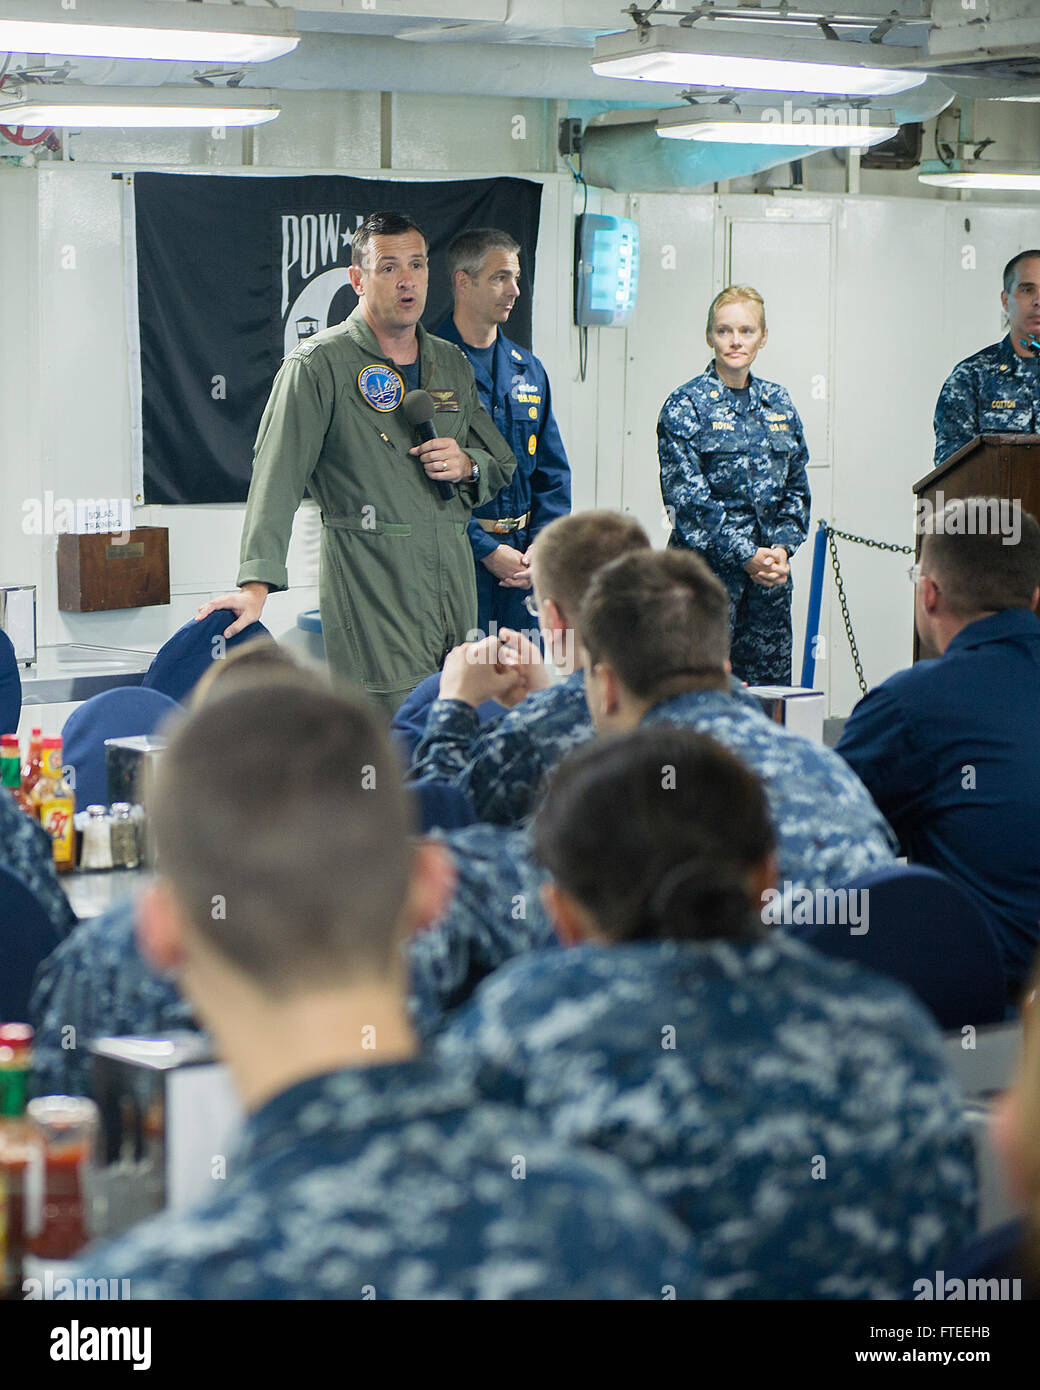 140530-N-EZ054-029  ATLANTIC OCEAN (May 30, 2014) Capt. Craig A. Clapperton, commanding officer of the USS Mount Whitney (LCC20) speaks to sailors assigned to the Mount Whitney during an All Hands Call aboard the Mount Whitney. Mount Whitney, homeported in Gaeta, Italy, is the U.S. 6th Fleet flagship and operates with a combined crew of U.S. sailors and Military Sealift Command (MSC) civil service mariners. (U.S. Navy photo by Mass Communication Specialist 3rd Class Luis R. Chavez Jr/Released) Stock Photo